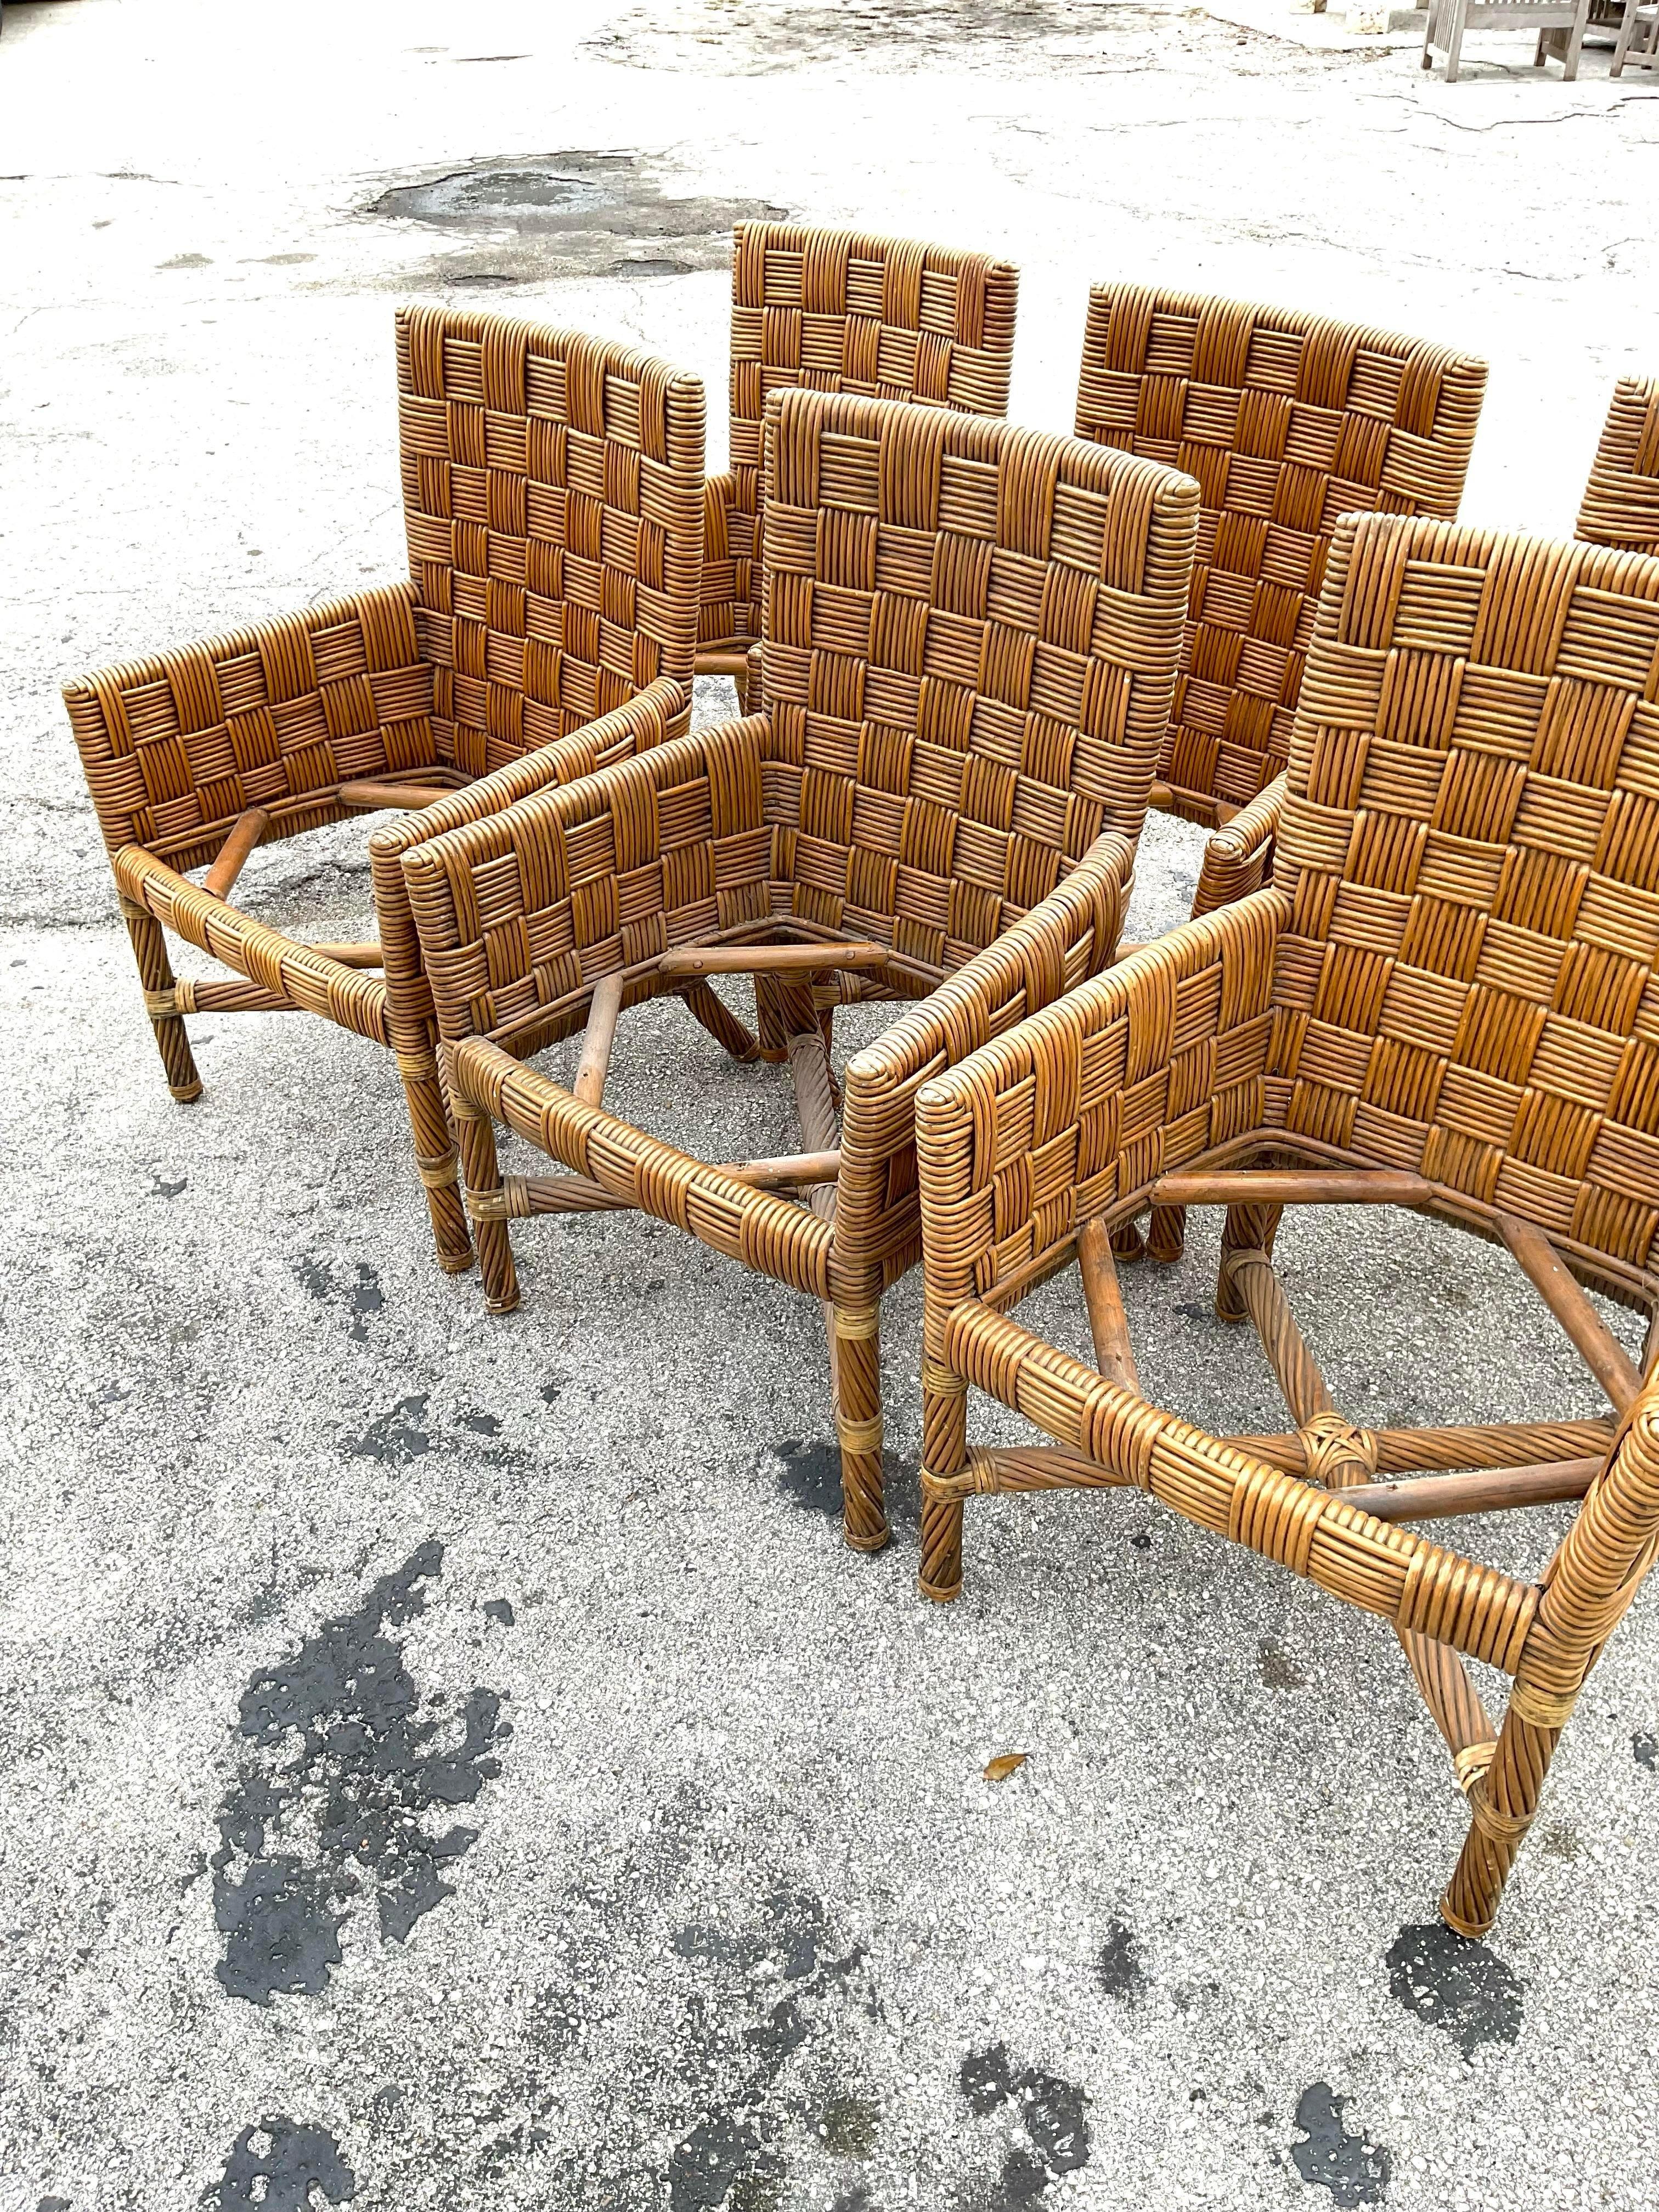 Vintage set of 6 arm chairs in a thick basket weave woven rattan block pattern. Fabulous natural element to add to any dining space. All the chairs have arms making them comfortable and elegant. Acquired from a Palm Beach estate.